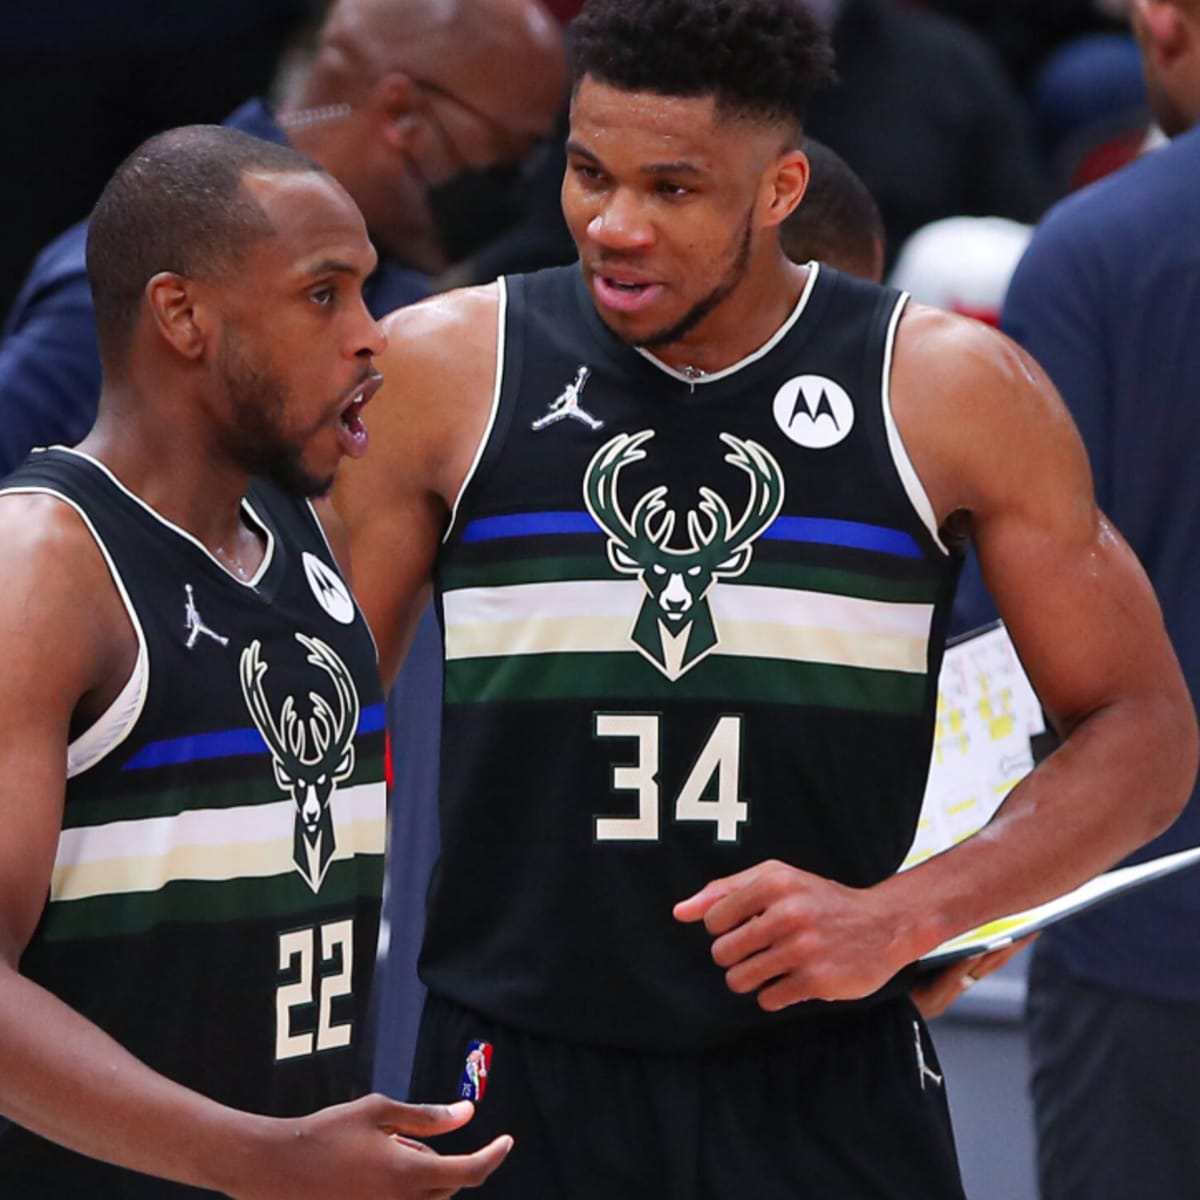 Finger: From Bucks to Spurs, failure is essential in pro sports